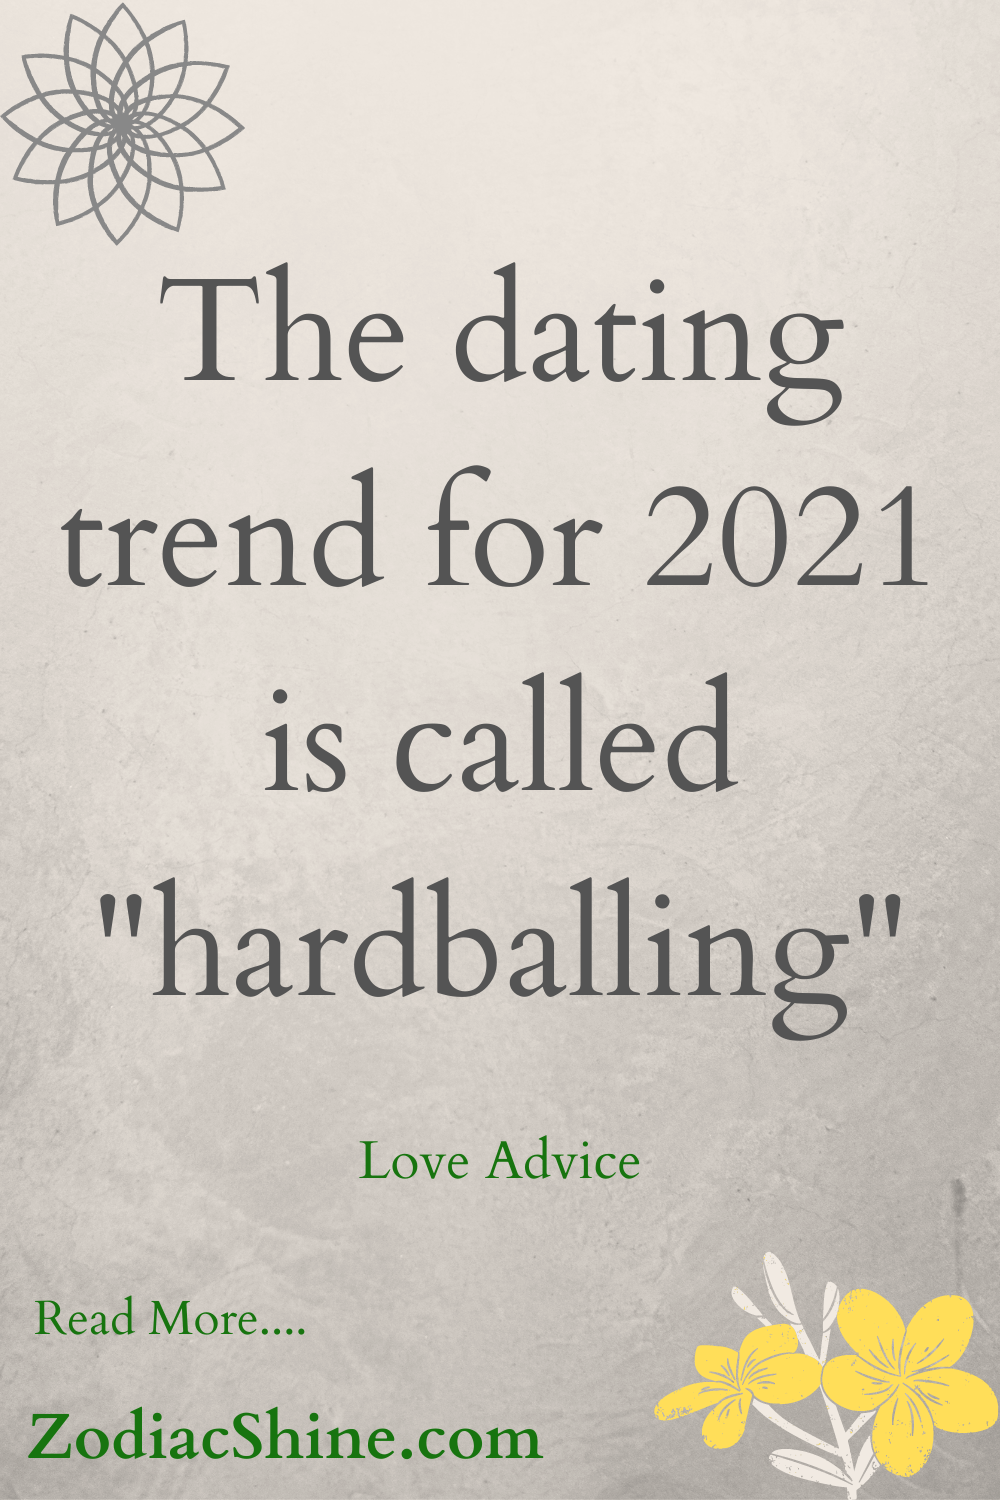 The dating trend for 2021 is called "hardballing"